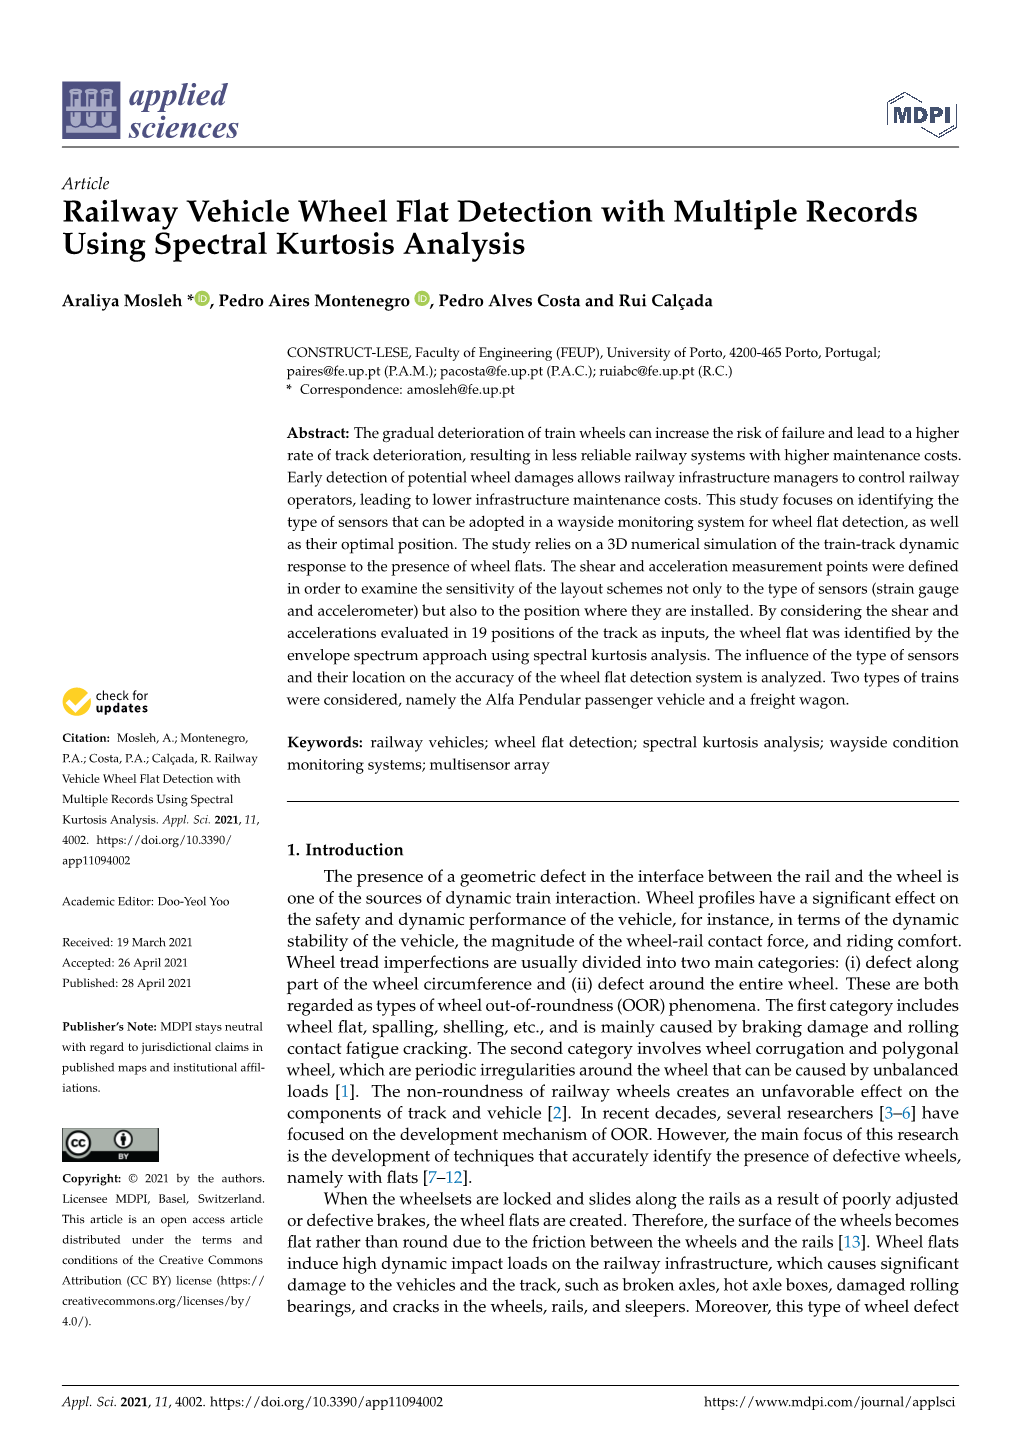 Railway Vehicle Wheel Flat Detection with Multiple Records Using Spectral Kurtosis Analysis